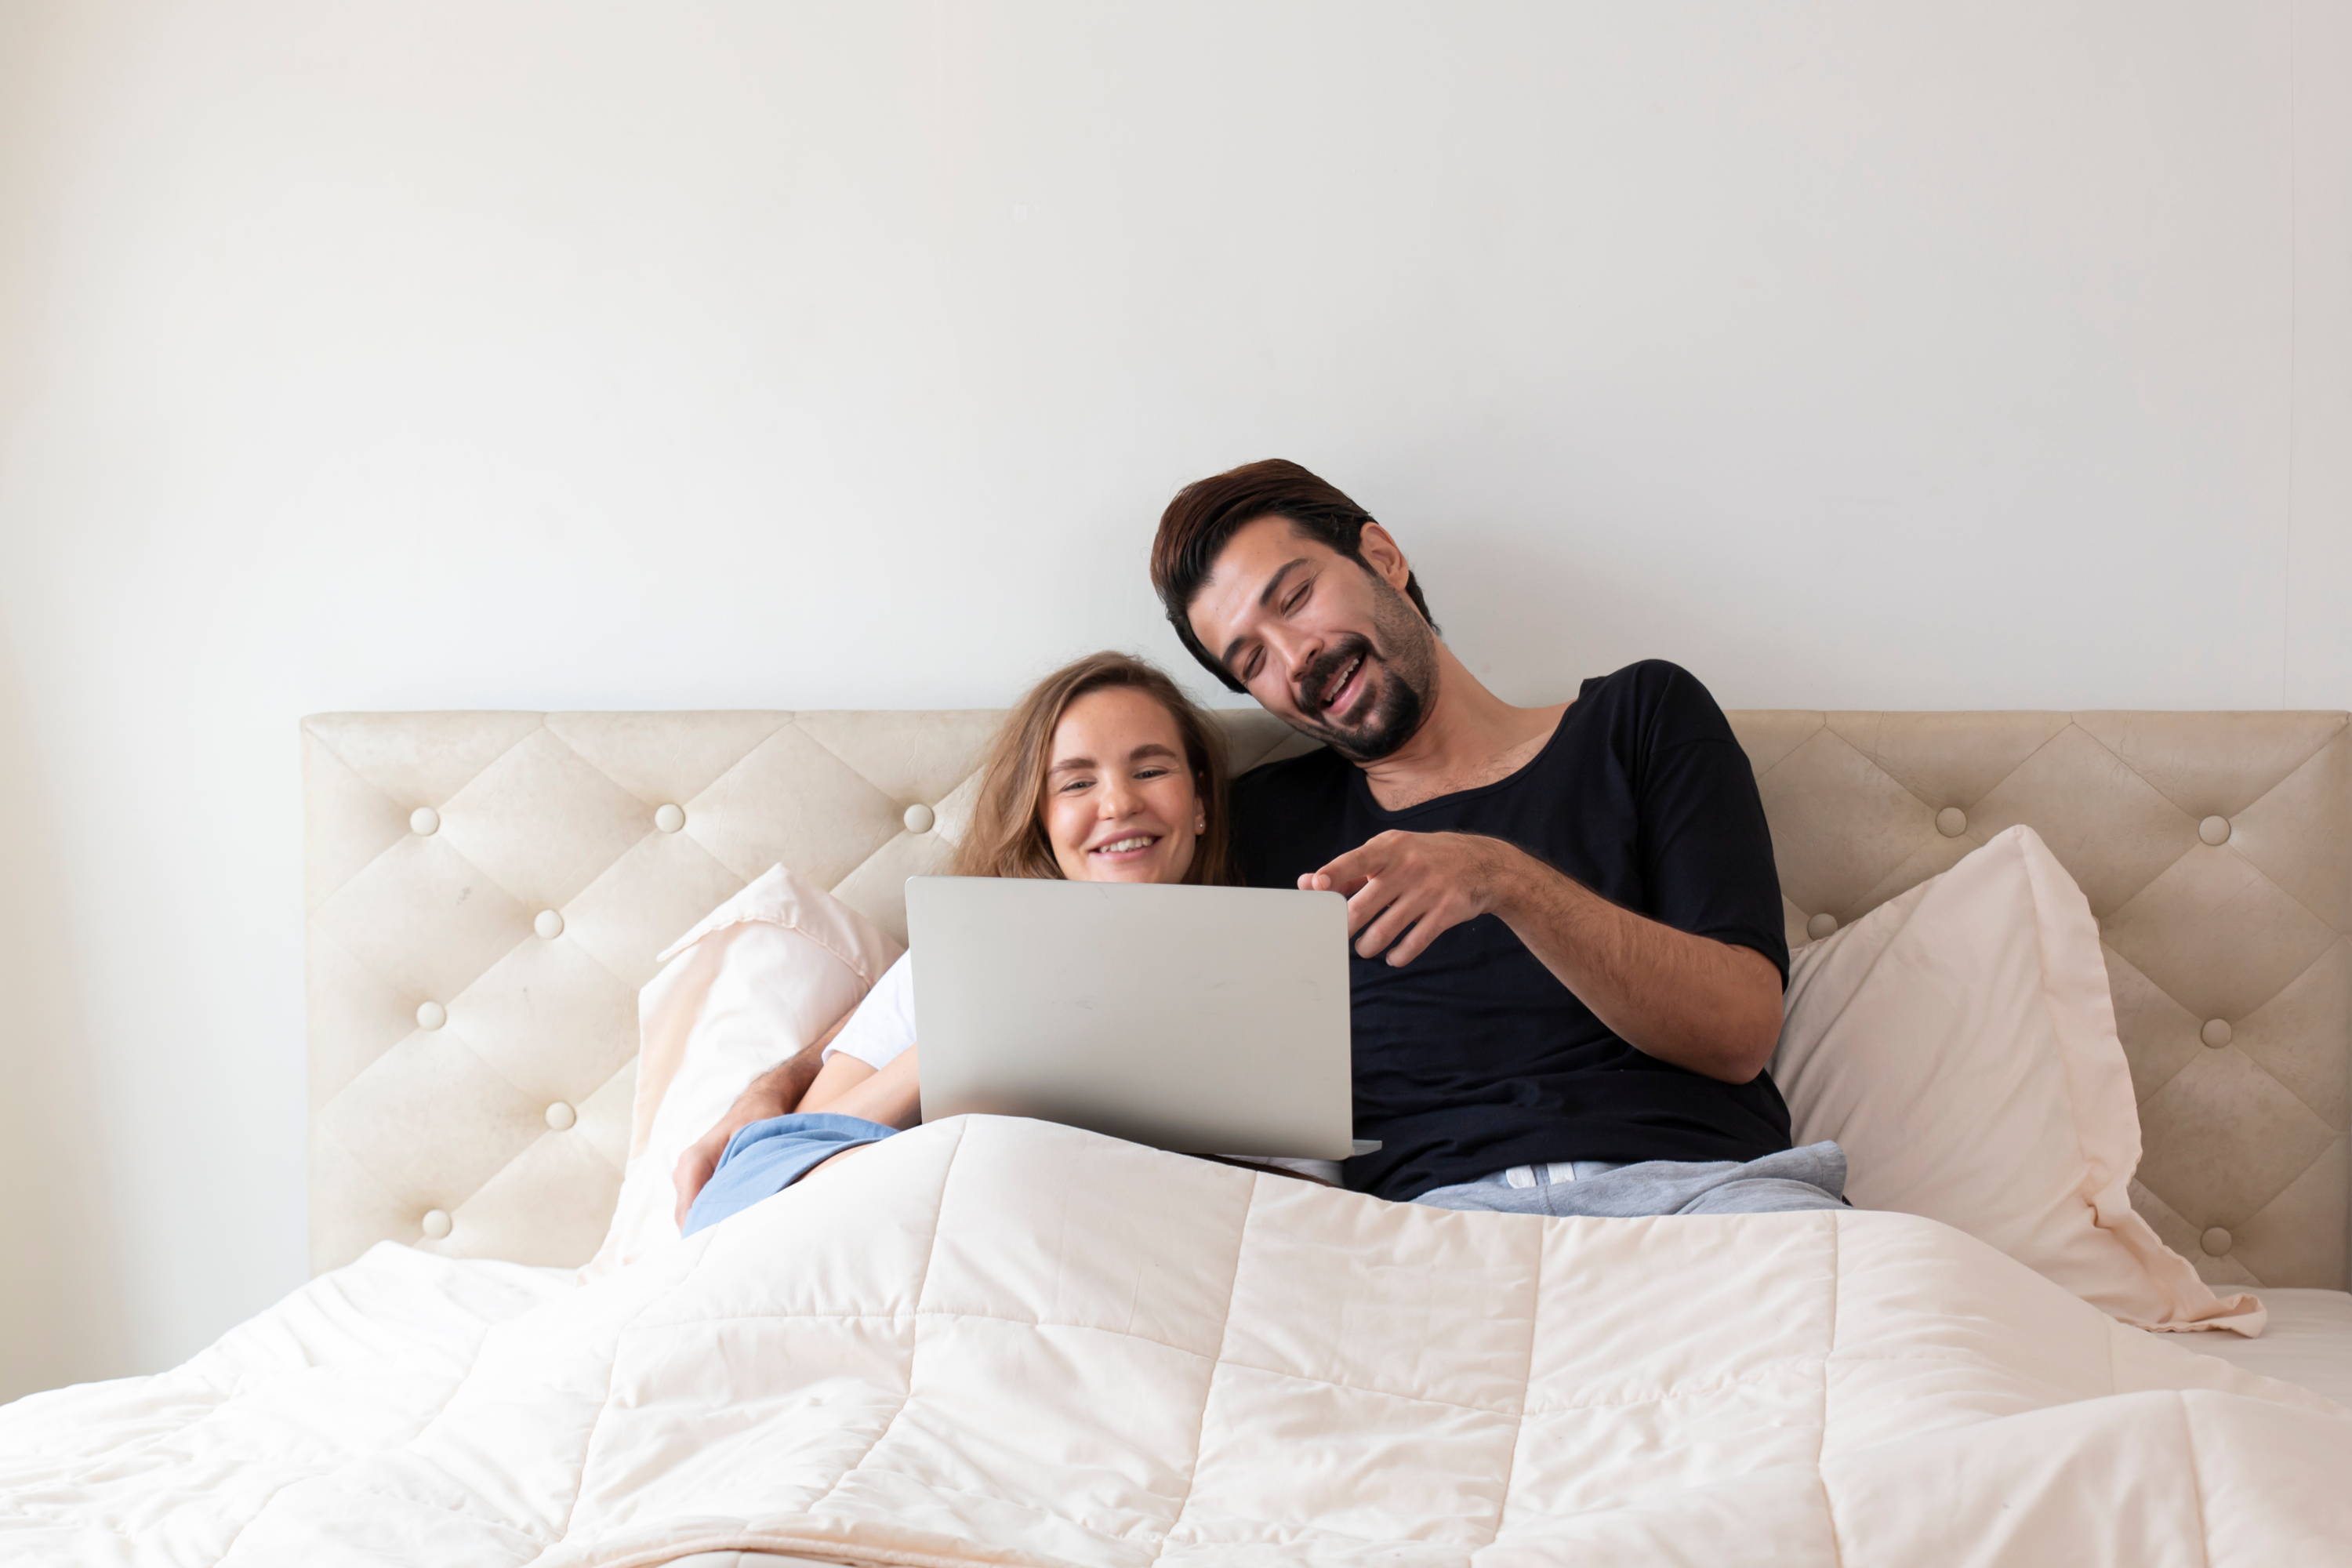 A man and woman lay in bed watching a movie on a laptop together.